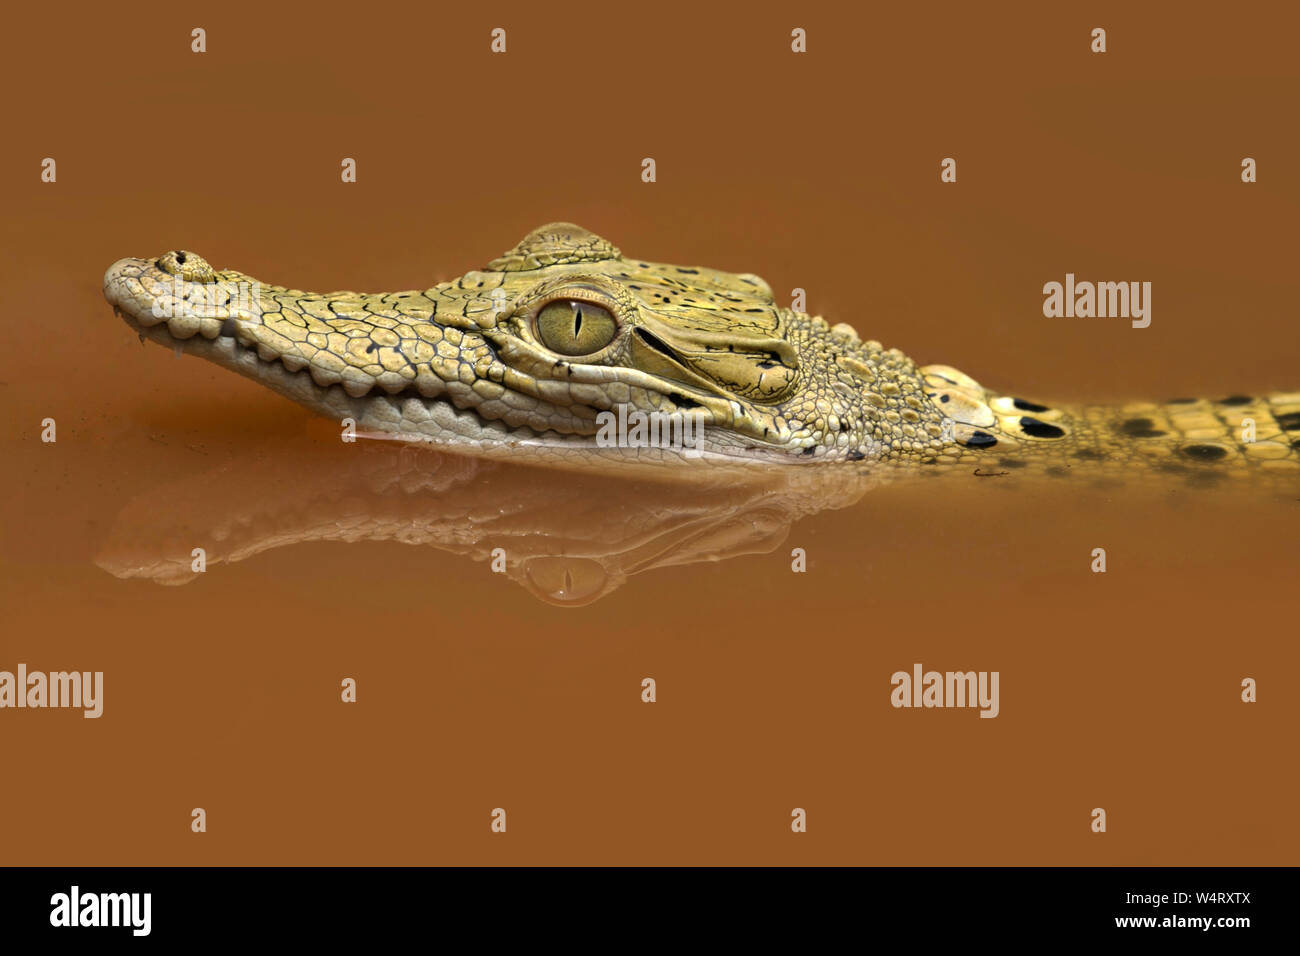 Close-up of a crocodile swimming in a river, Indonesia Stock Photo